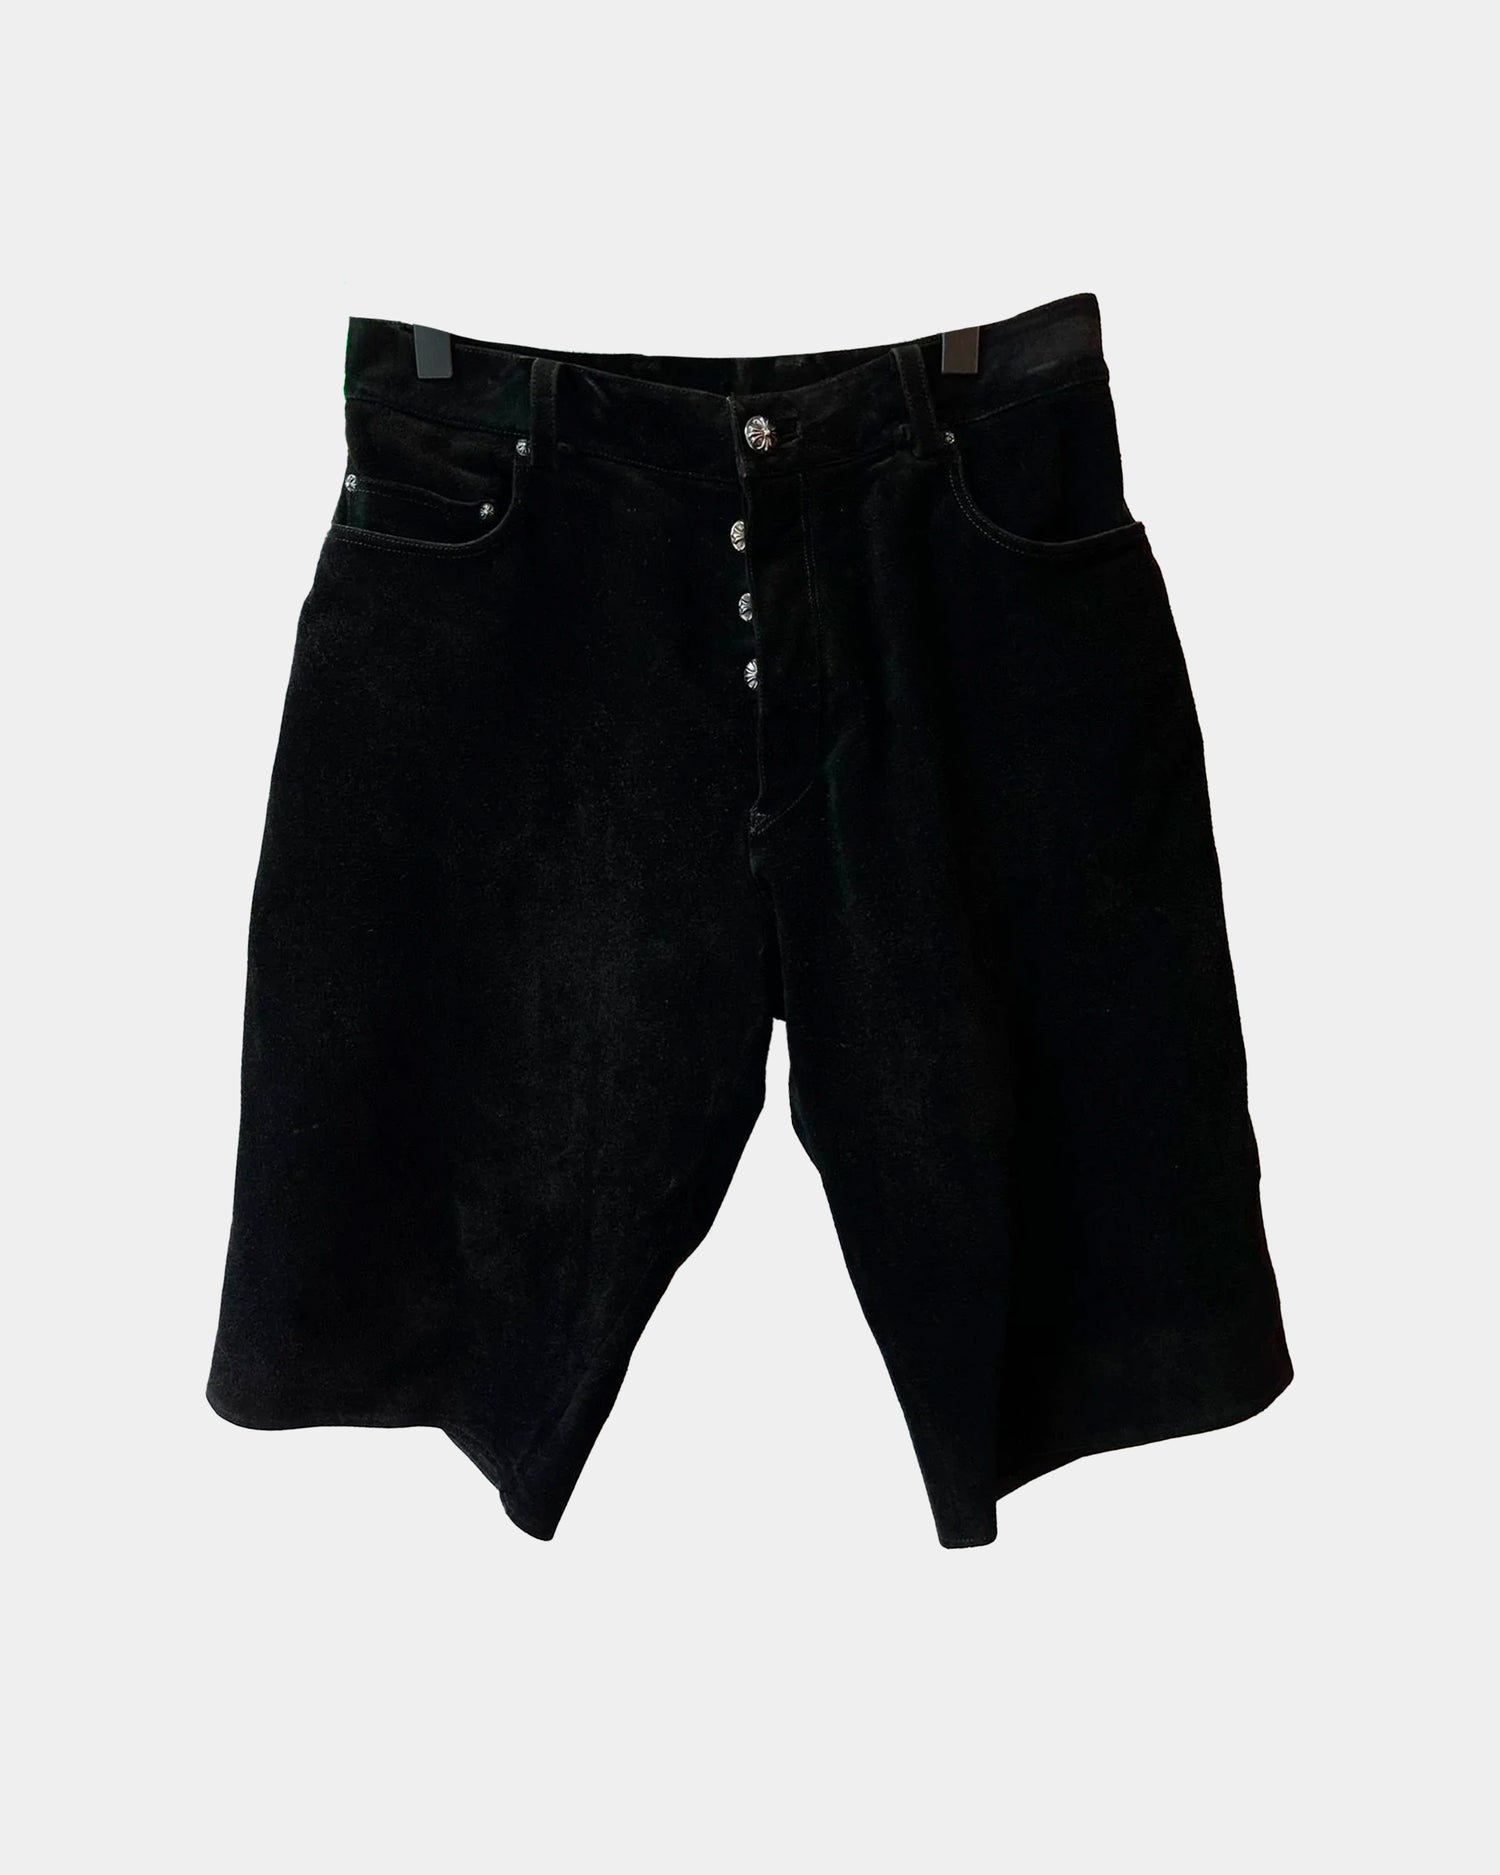 Chrome Hearts SUEDE BLACK LEATHER Shorts